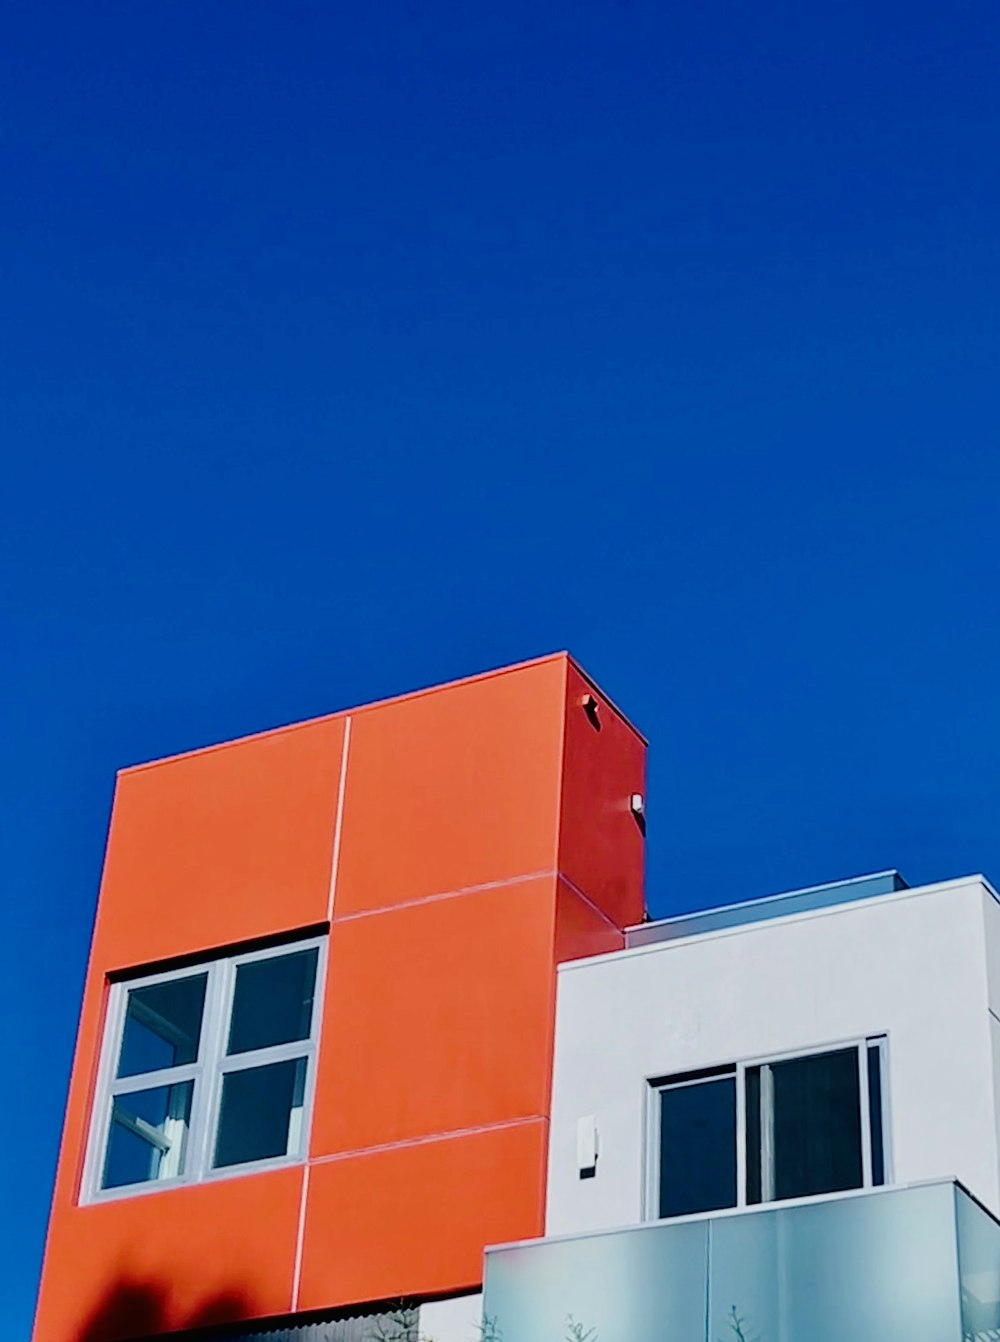 an orange and white building against a blue sky